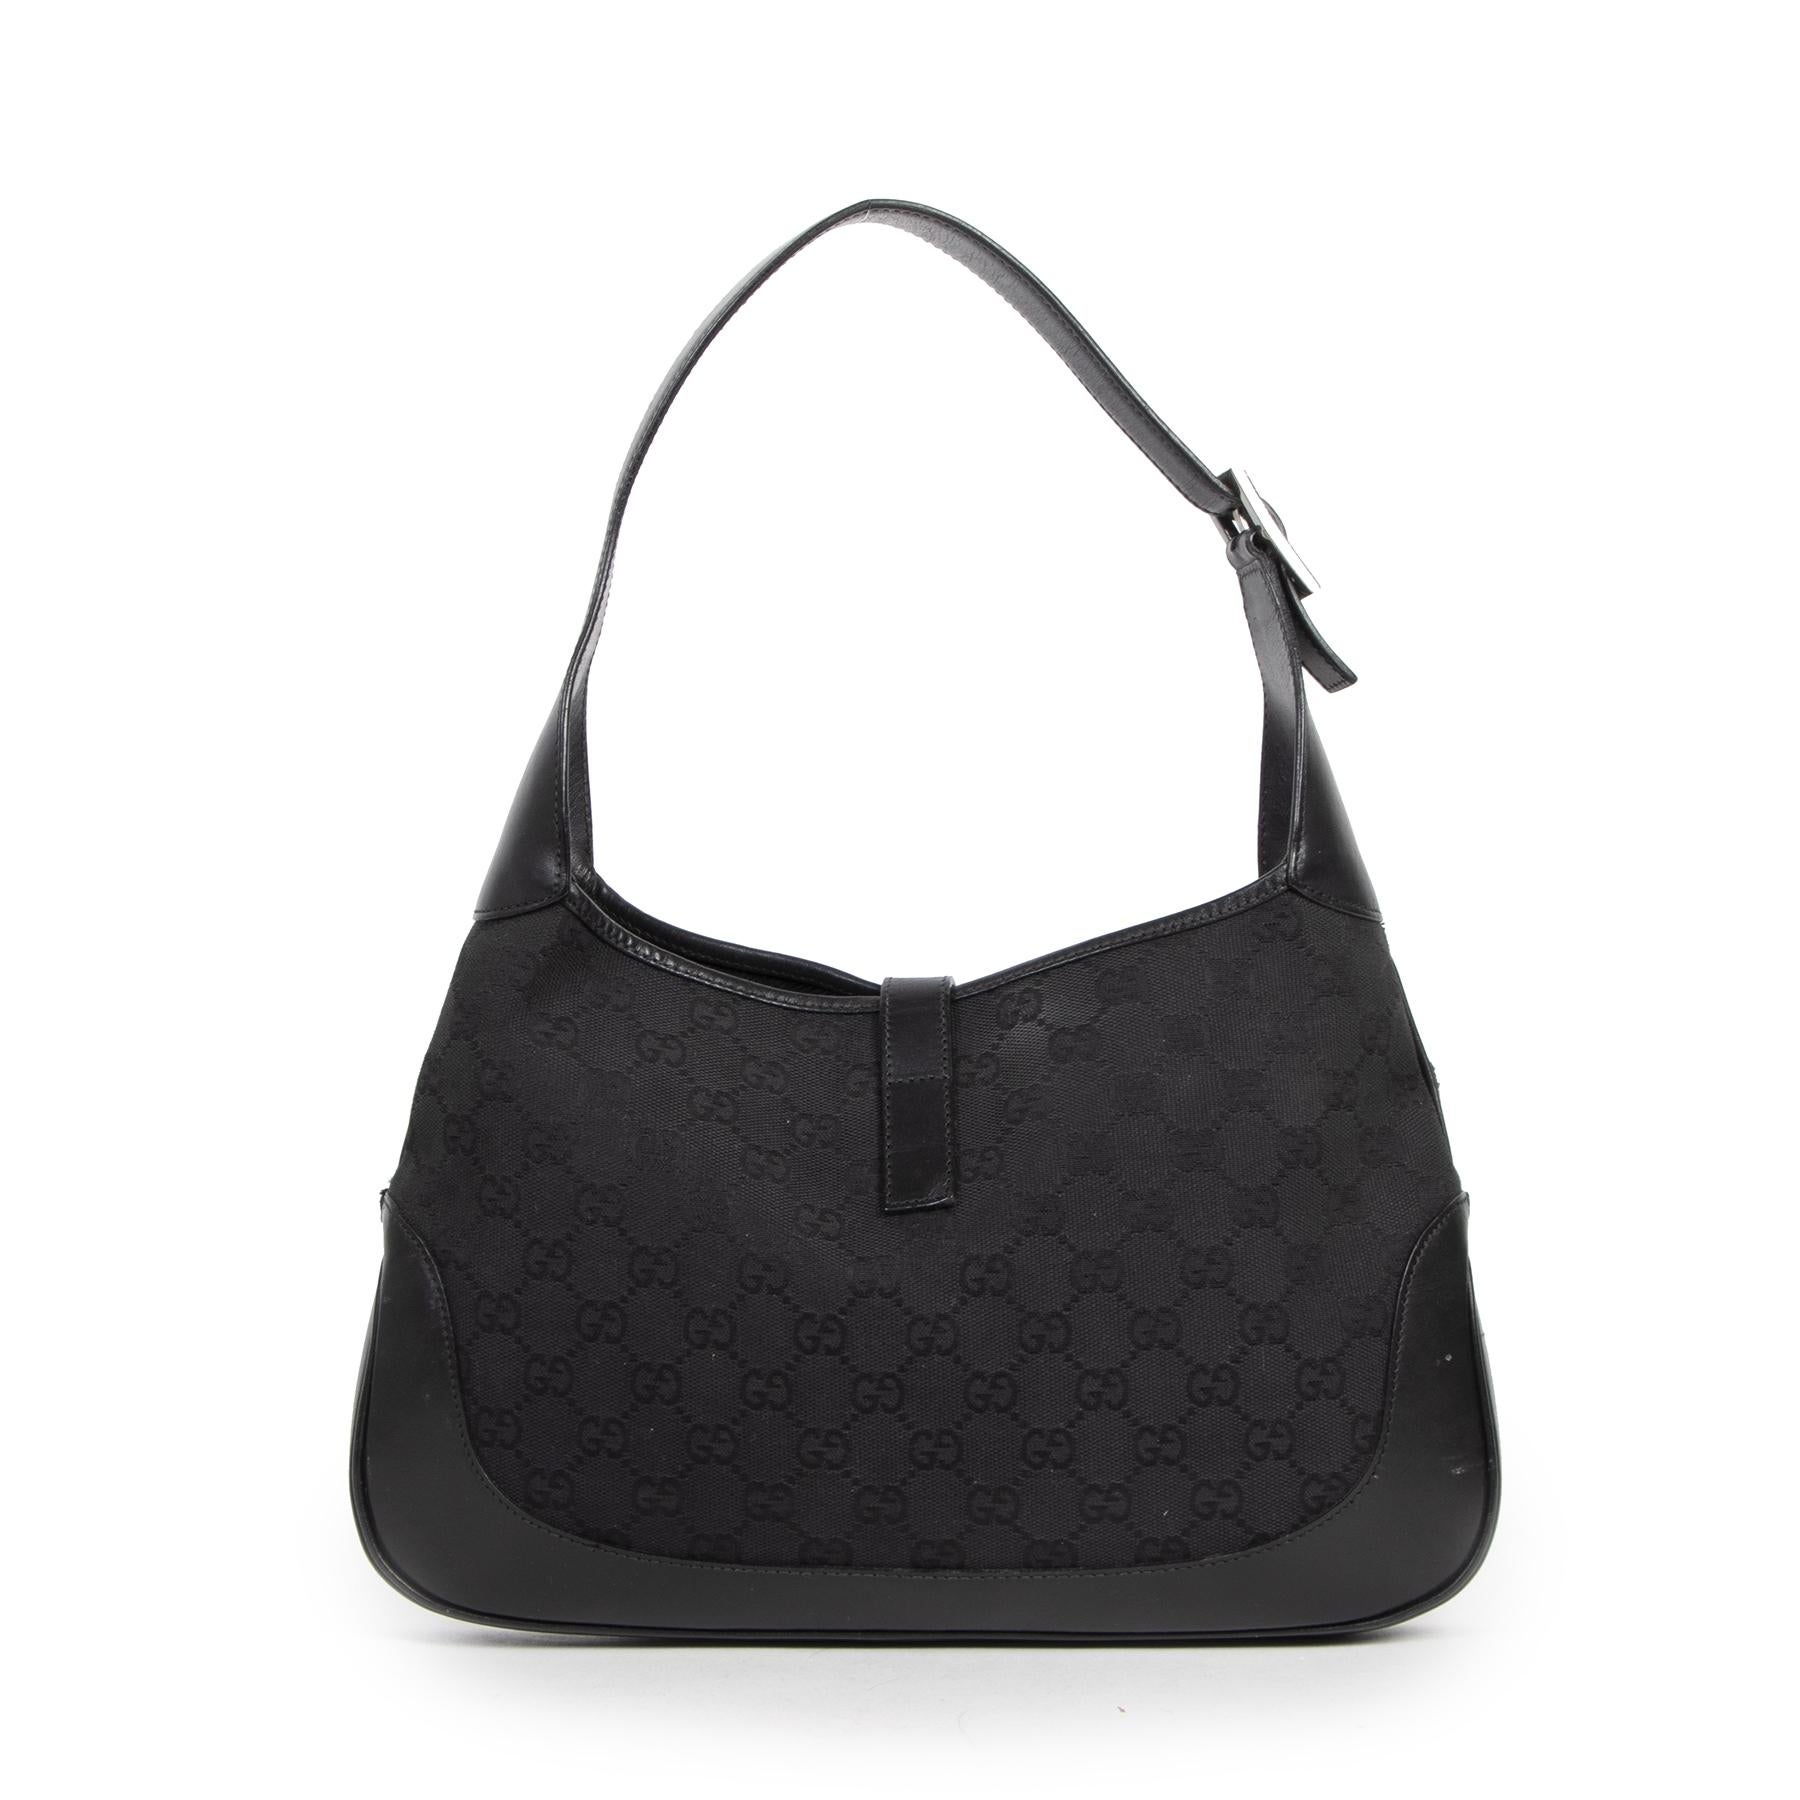 Good preloved condition

Gucci Jackie Black GG Monogram Canvas Leather Shoulder Bag 

This gorgeous Gucci shoulder bag was designed in 1958 as an hommage to Jackie Kennedy. The bag is crafted in the iconic GG monogram in black canvas and features